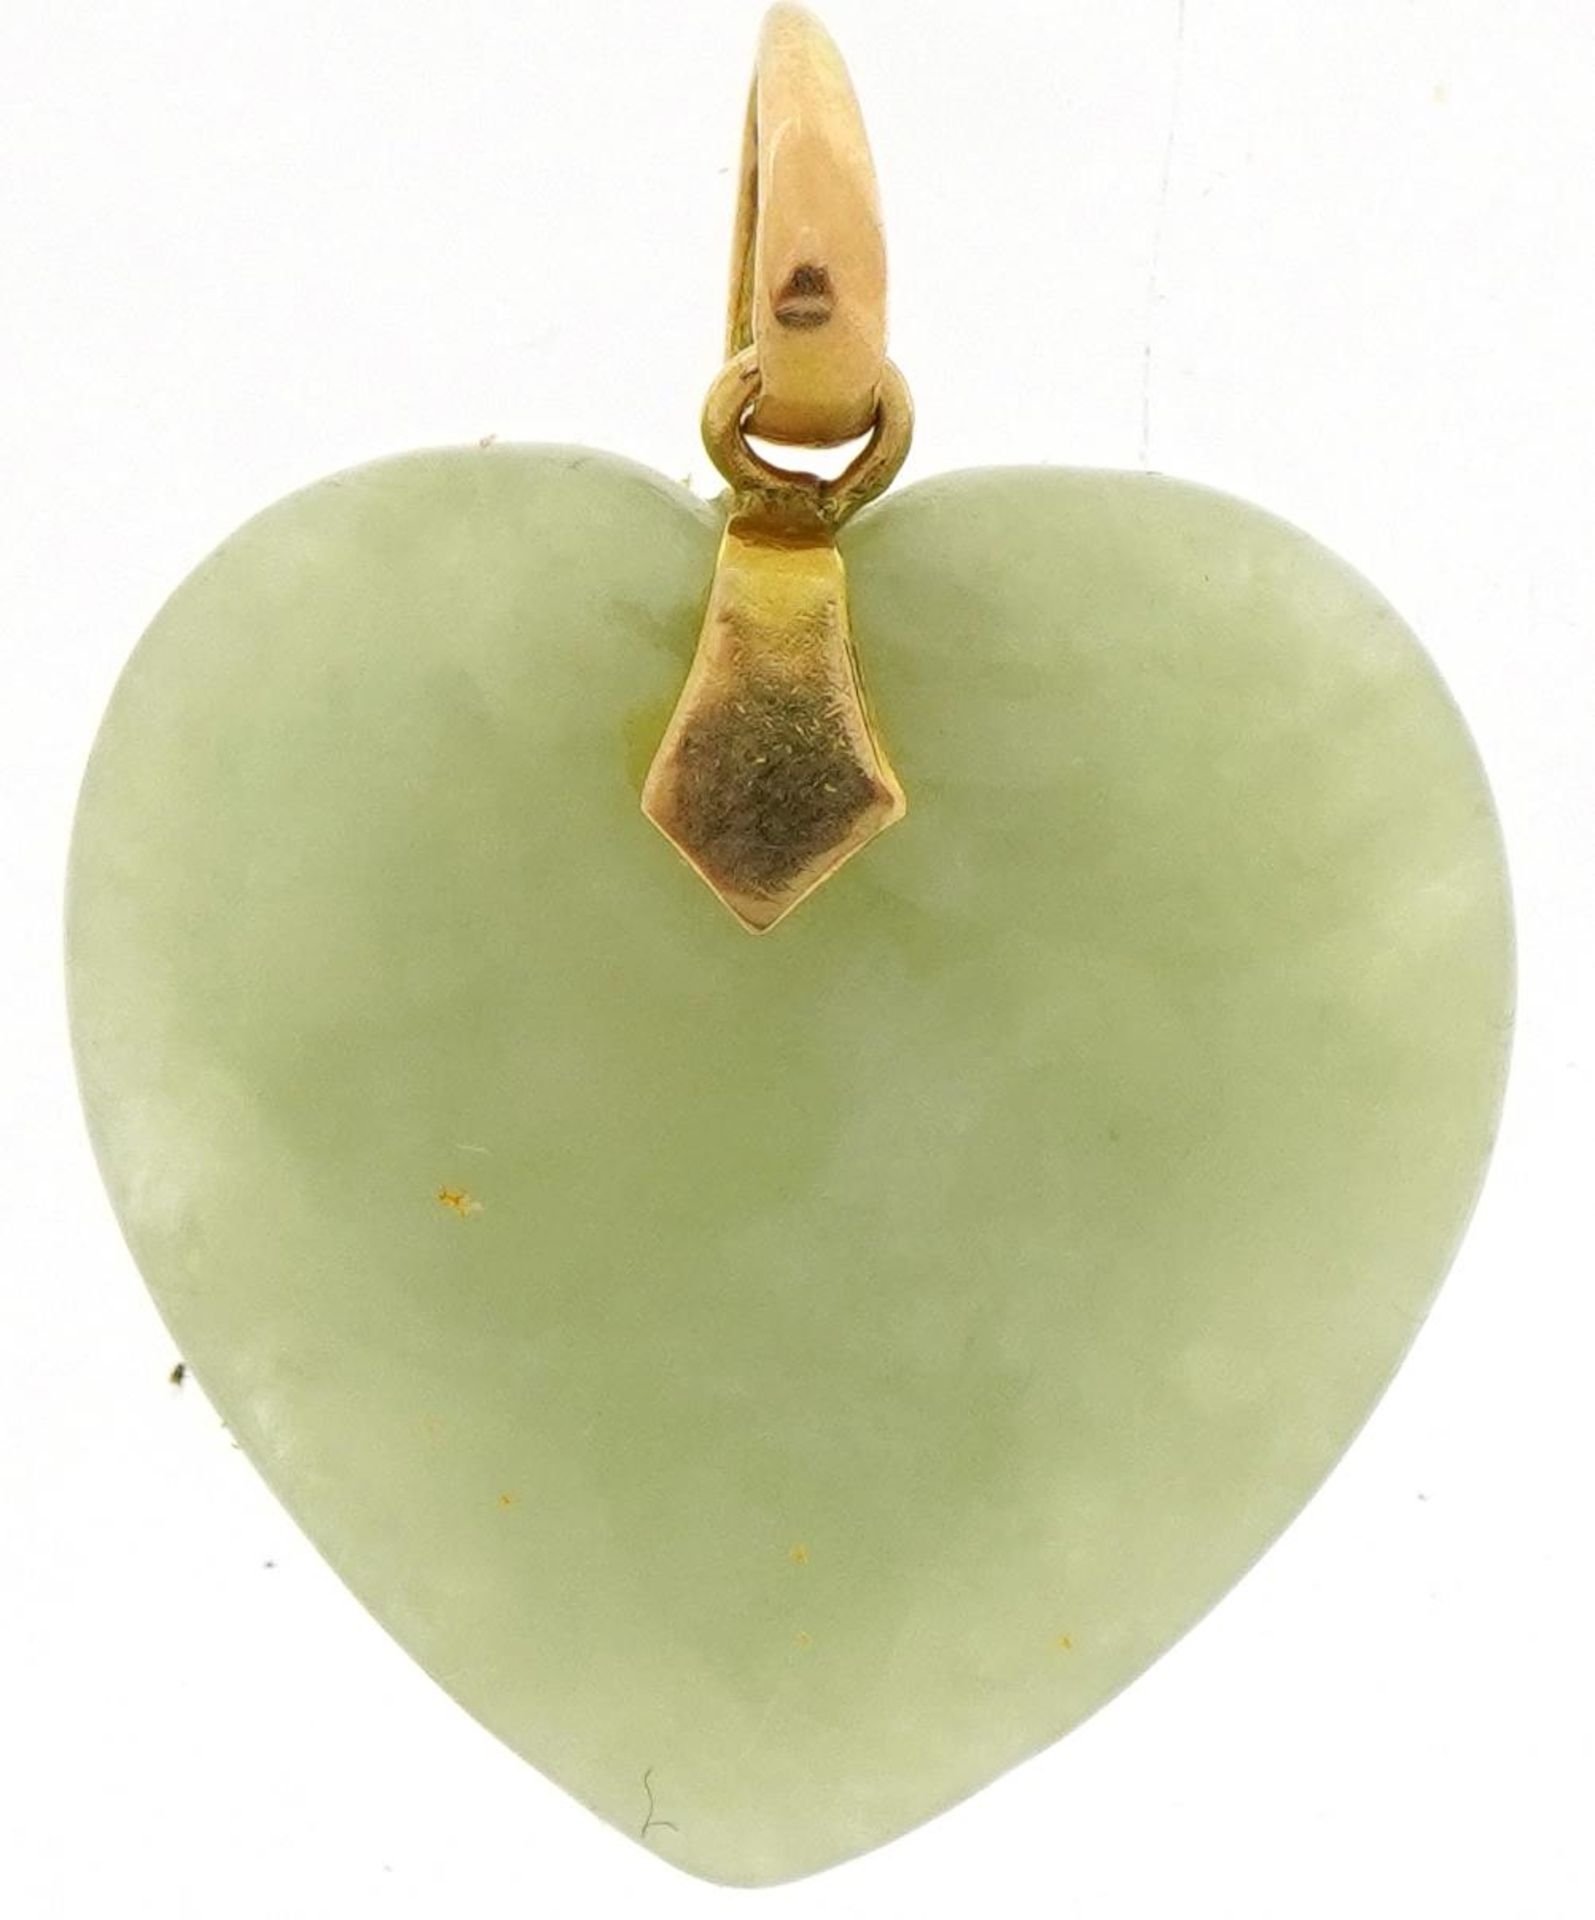 Gold mounted jade love heart pendant, possibly Chinese, 2.7cm high, 3.8g : For further information